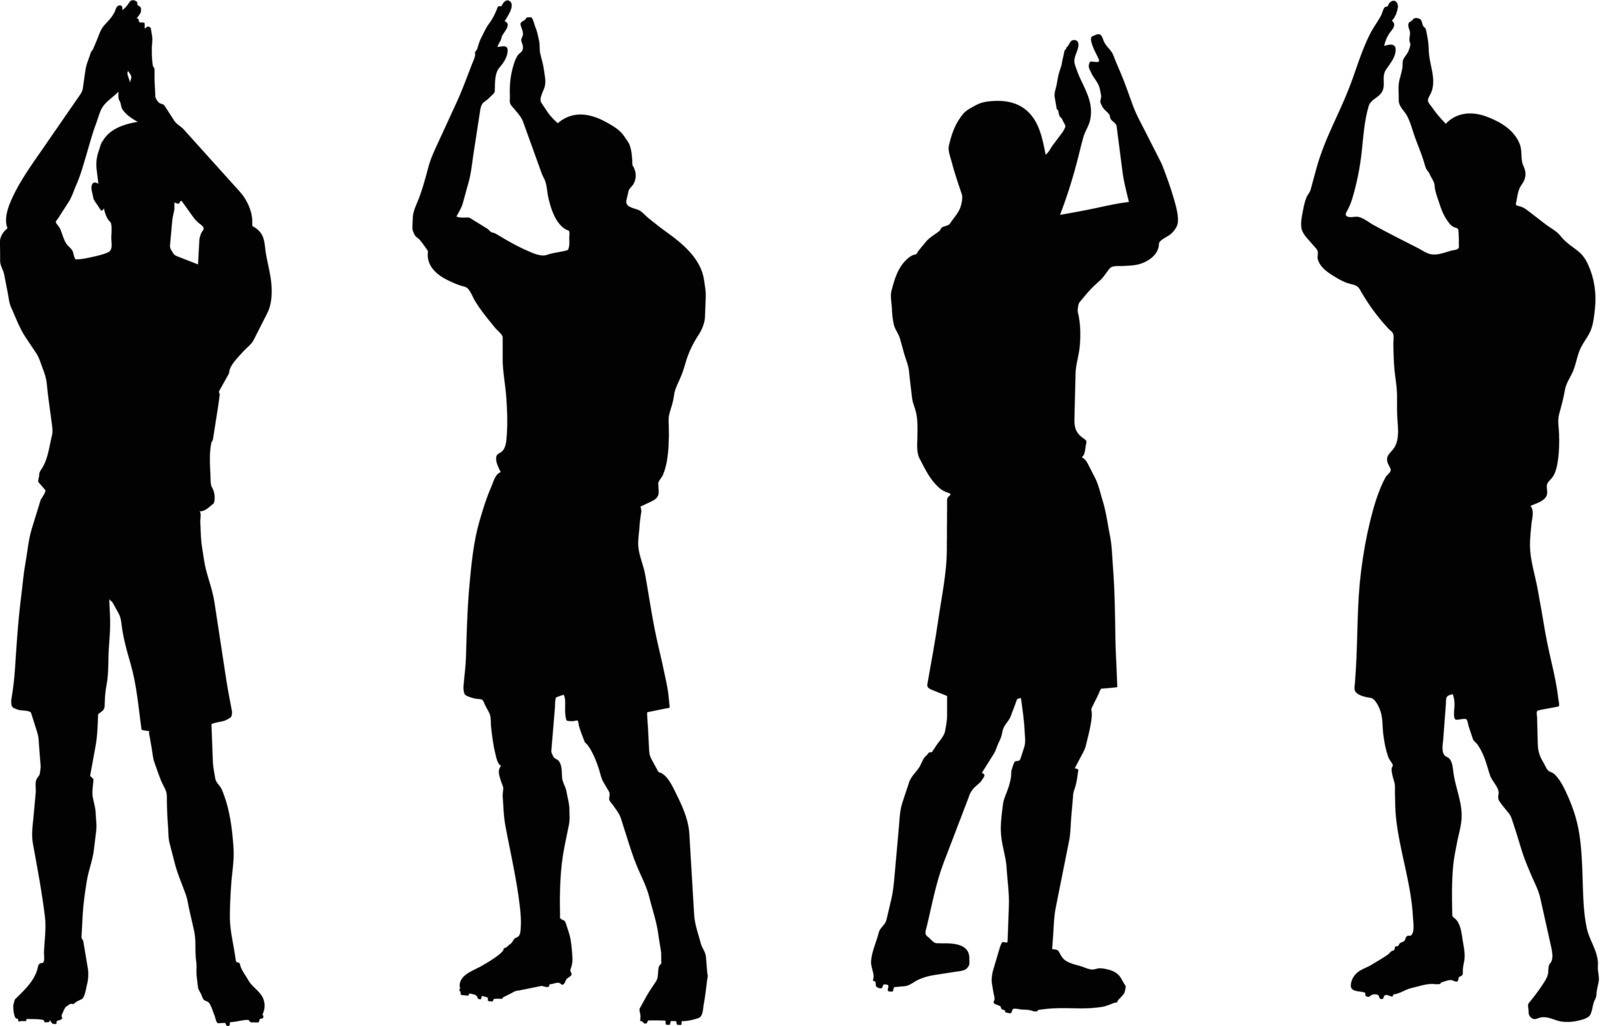 poses of soccer players silhouettes in rejoices position by Istanbul2009